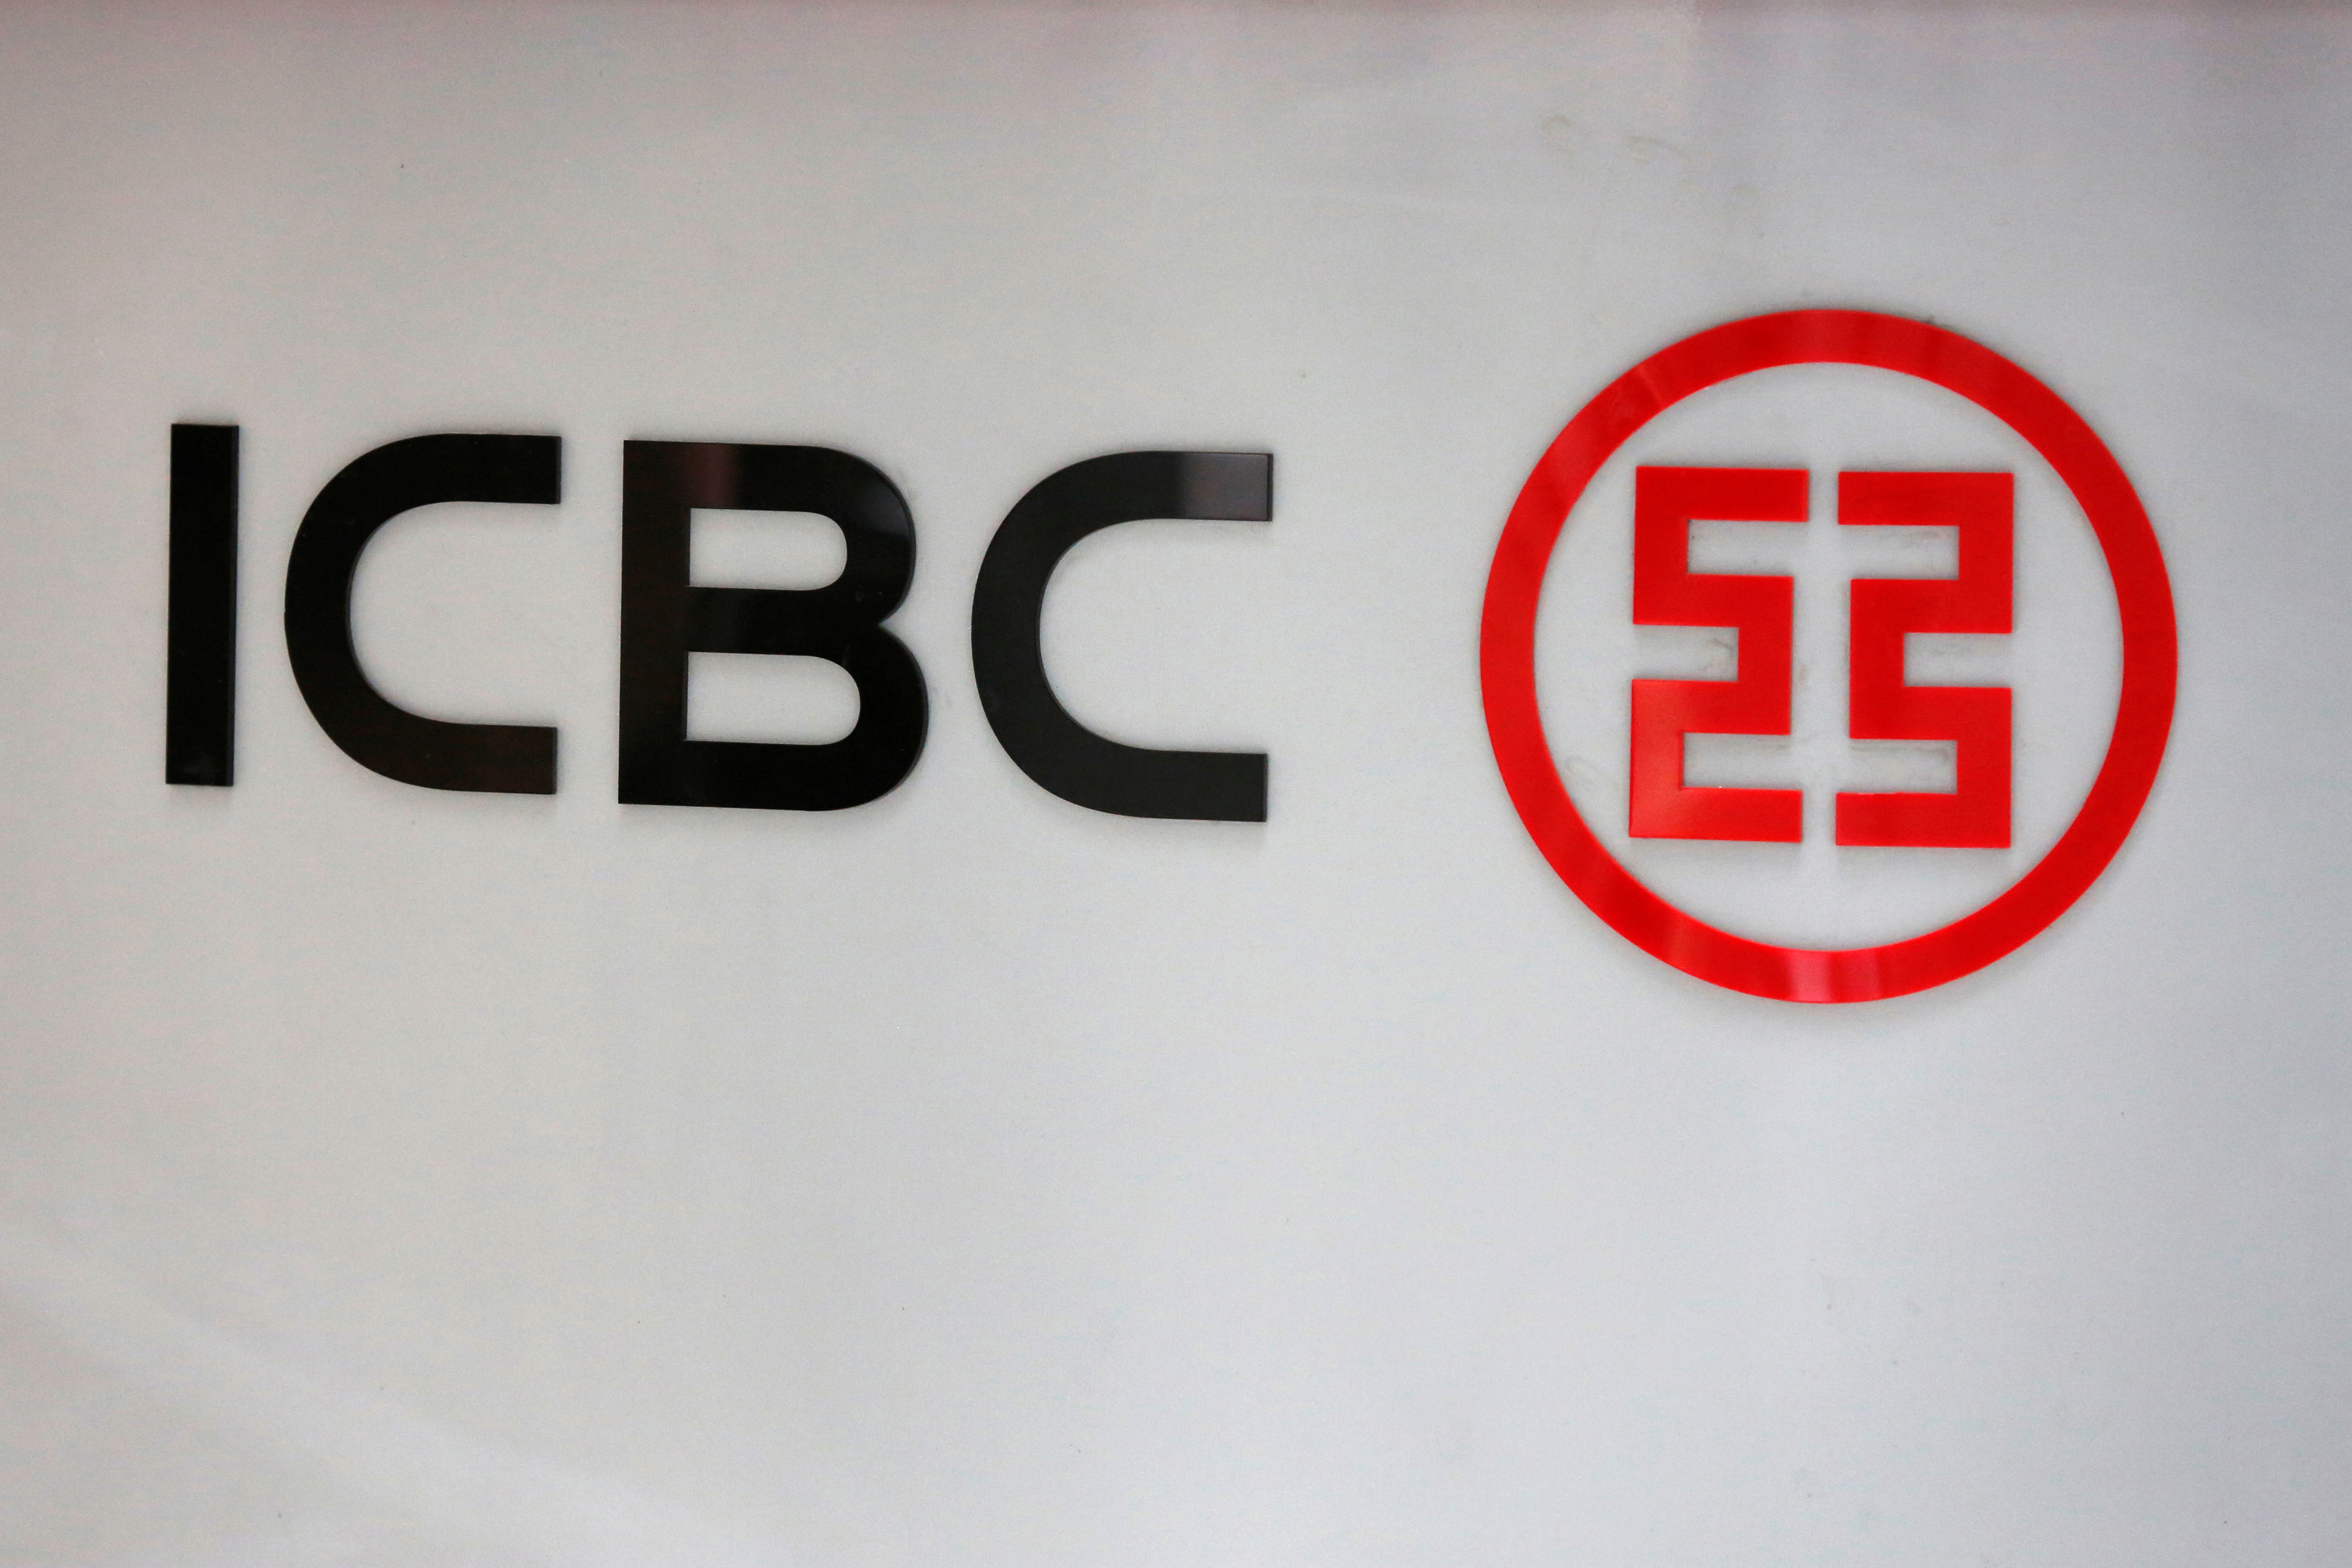 Industrial and Commercial Bank of China Ltd (ICBC)'s logo is seen at its branch in Beijing